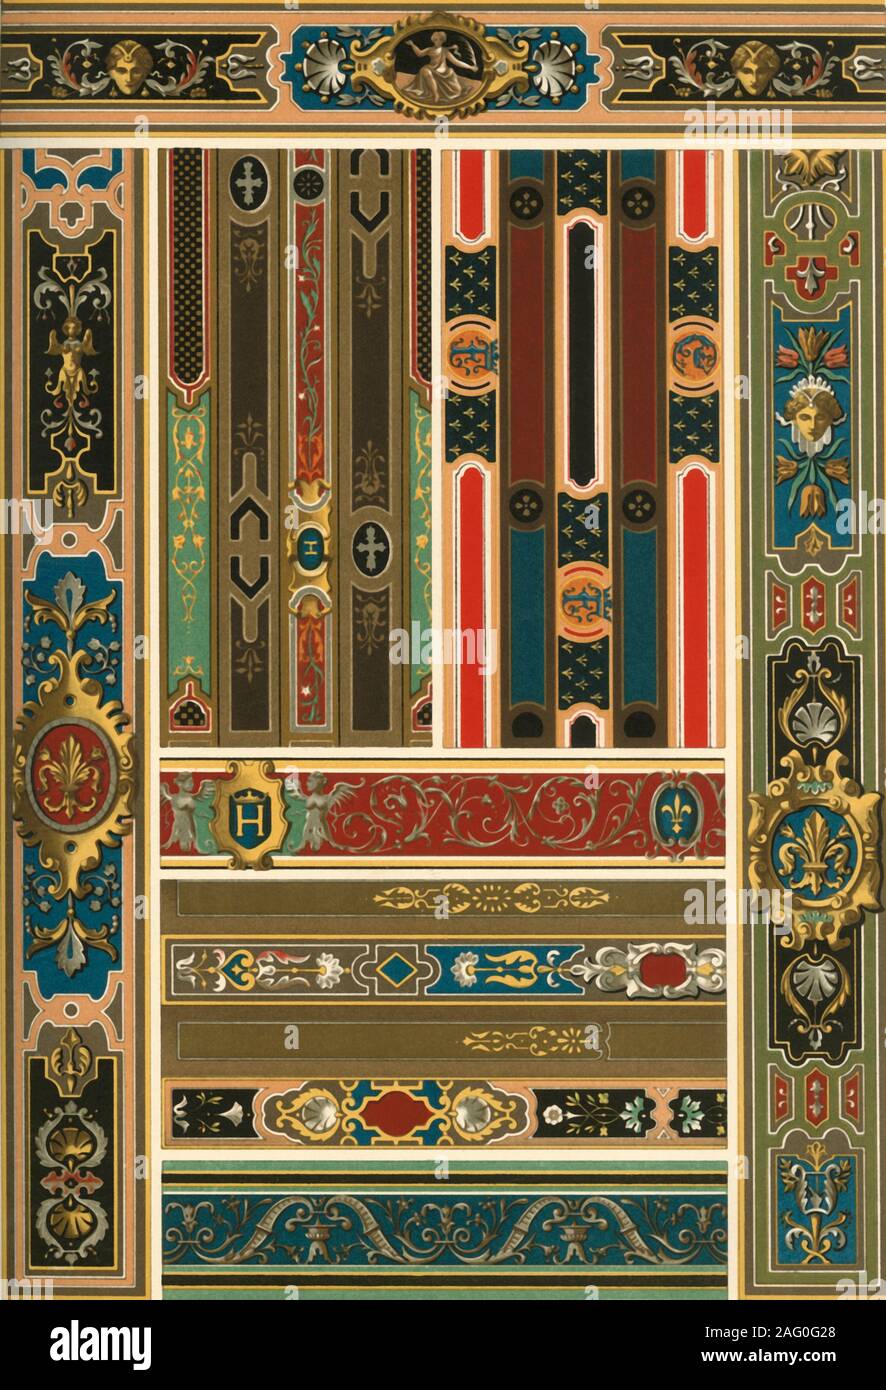 French Renaissance ceiling painting, (1898). 'Figs 1 and 3: Painted ceilings of timbers in the Castle at Blois (Fran&#xe7;ois I), [16th century]. Figs 2 and 4: Painted binding-beams on the same ceilings. Fig 5: Painted span-ceiling in the Castle at Wideville (Louis XIII), [17th century]. Figs 6, 7 and 8: Painted binding-beams on the same ceiling...In this plate span-ceilings only are taken into consideration, the character of which is entirely preserved by the applied painting. Each single beam has a special painting, several of them together forming a pattern regularly repeated...The lateral Stock Photo